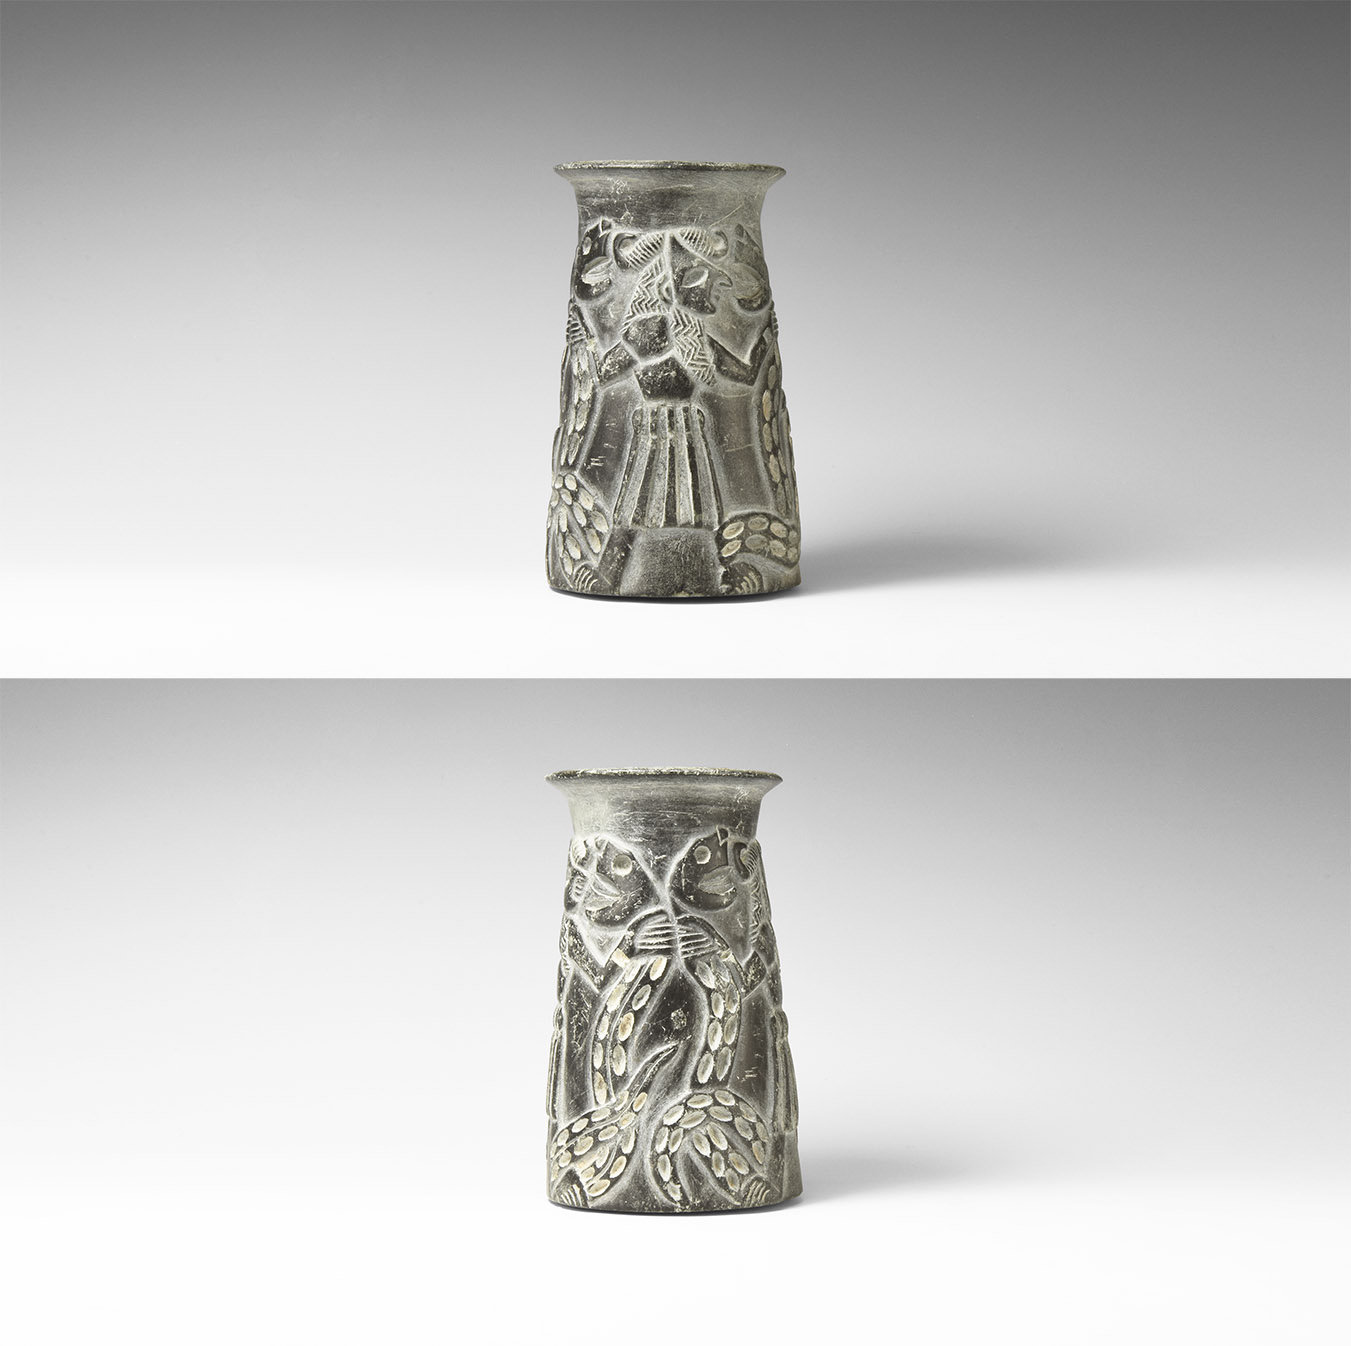 Western Asiatic Bactrian Vase with God Holding Two Serpents